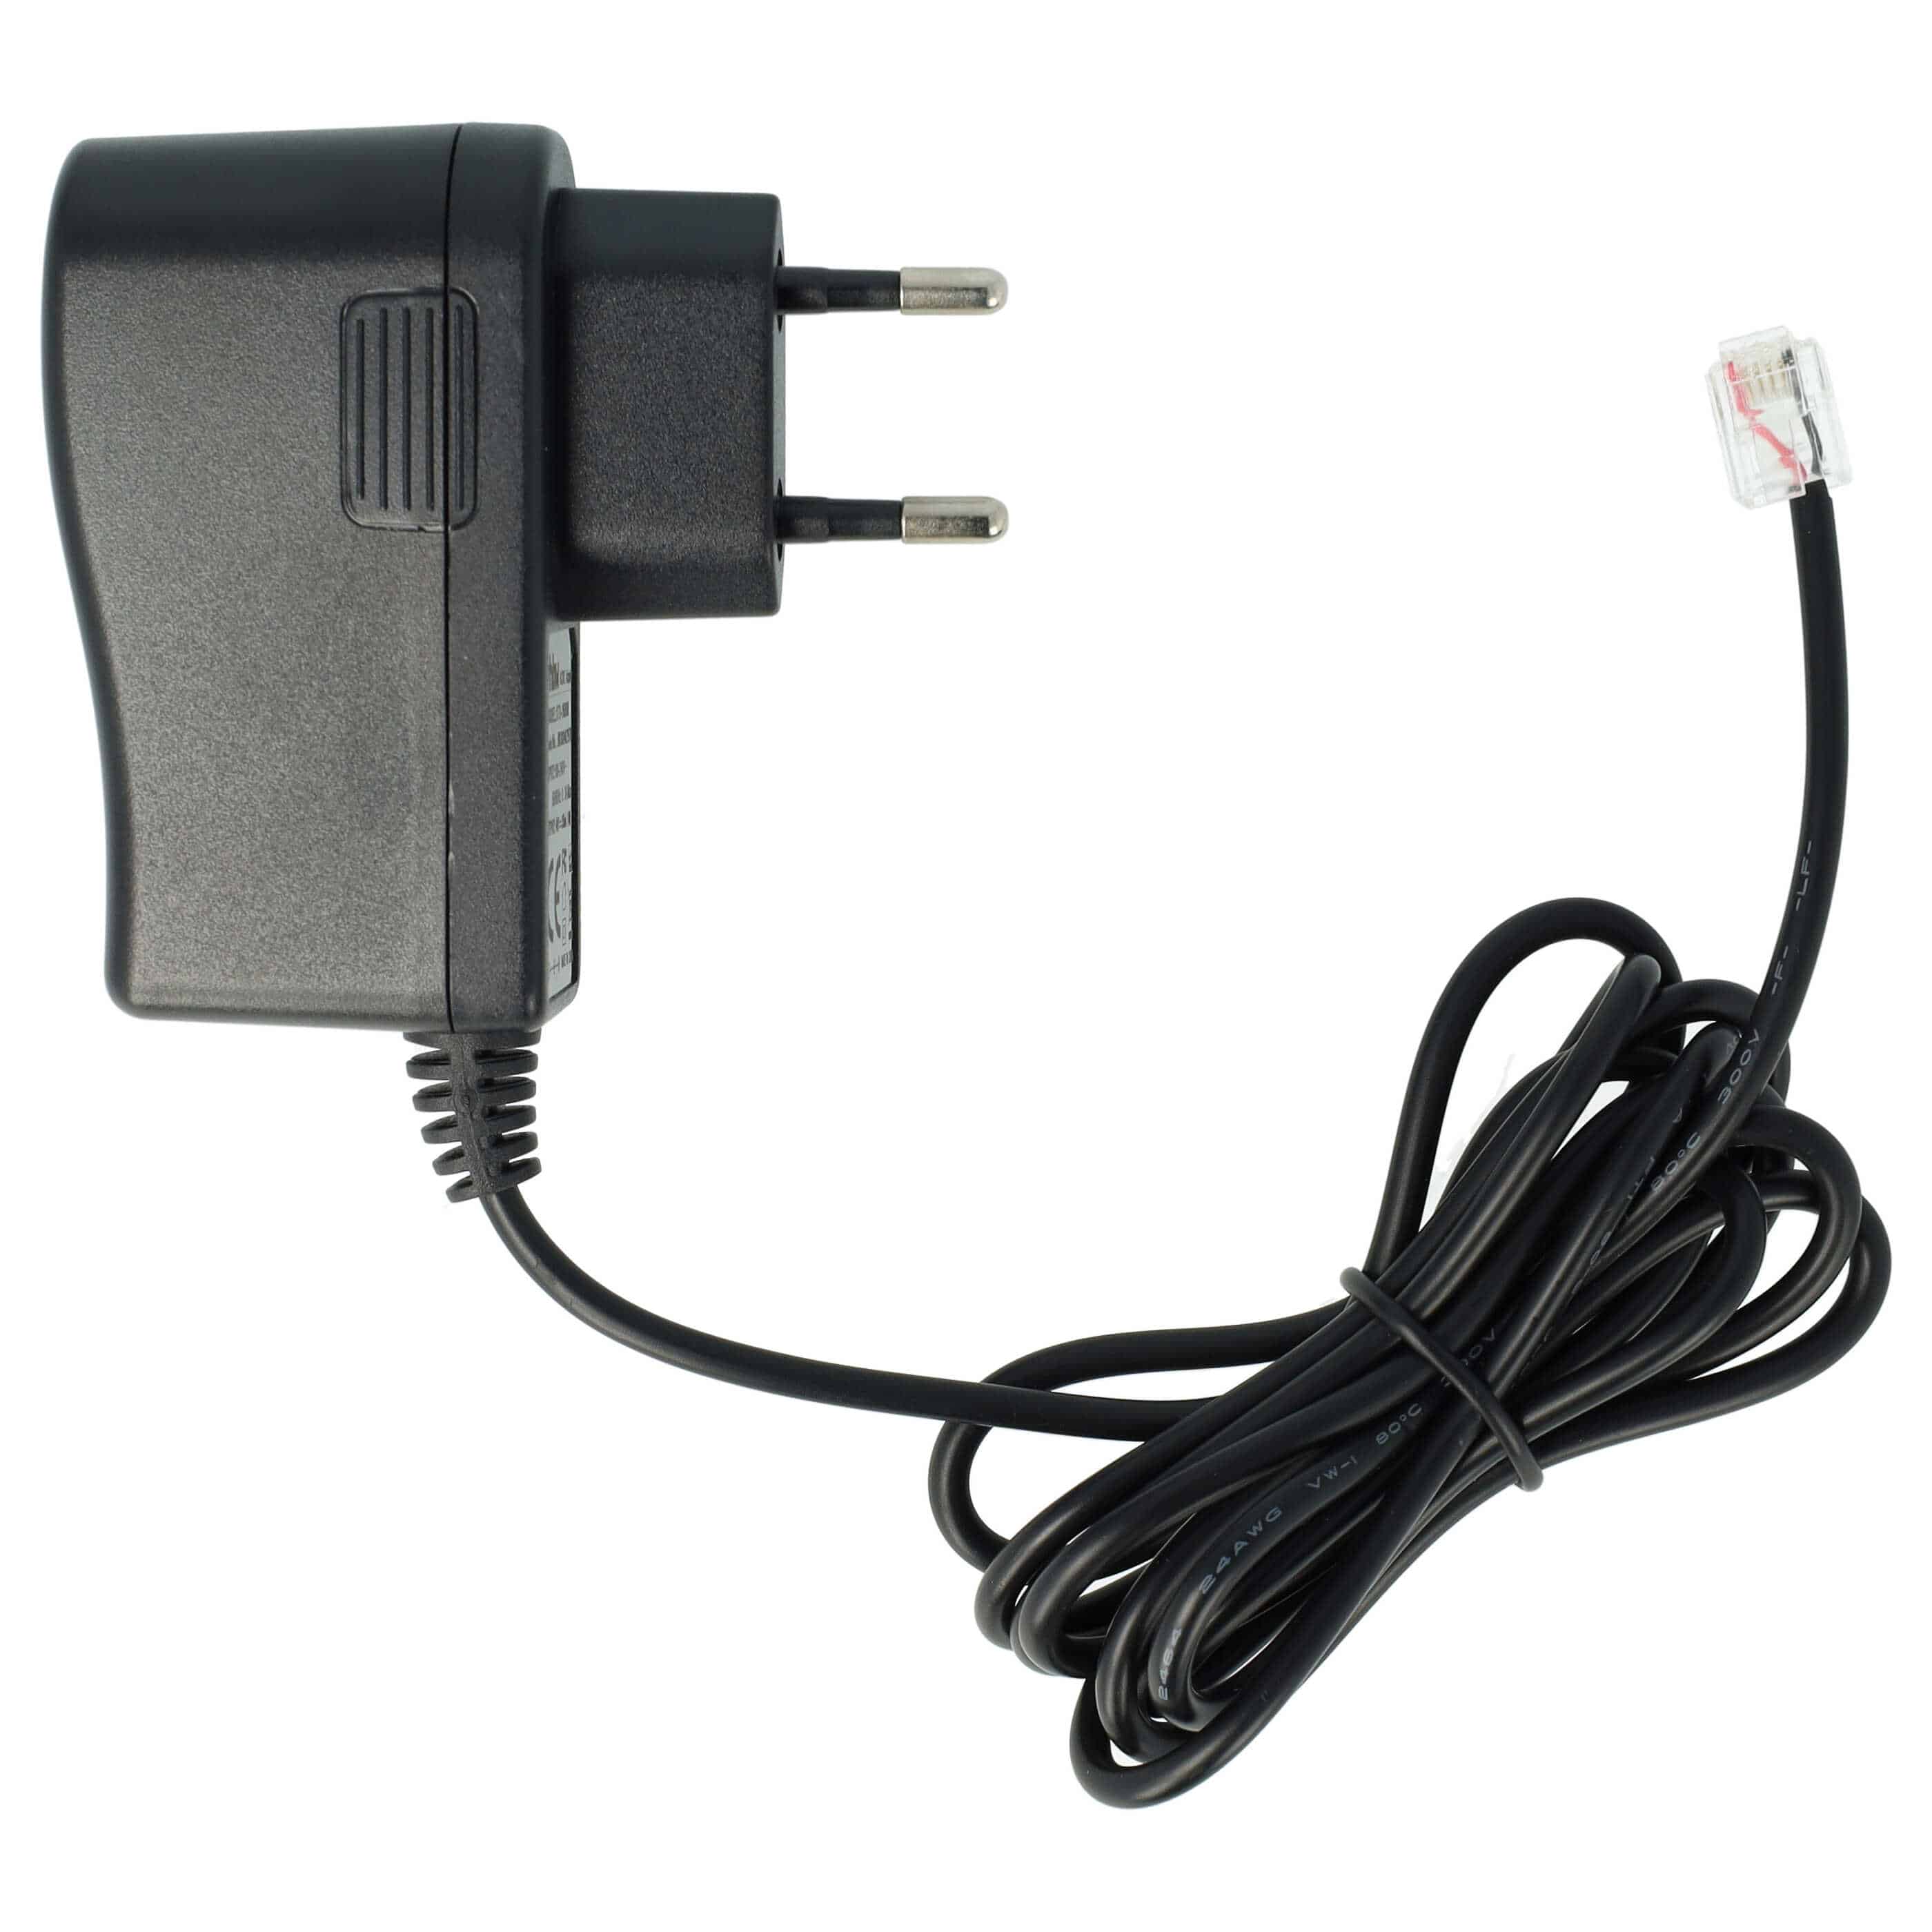 Mains Power Adapter suitable for Agfeo ST22 Landline Telephone, Home Telephone - 170 cm